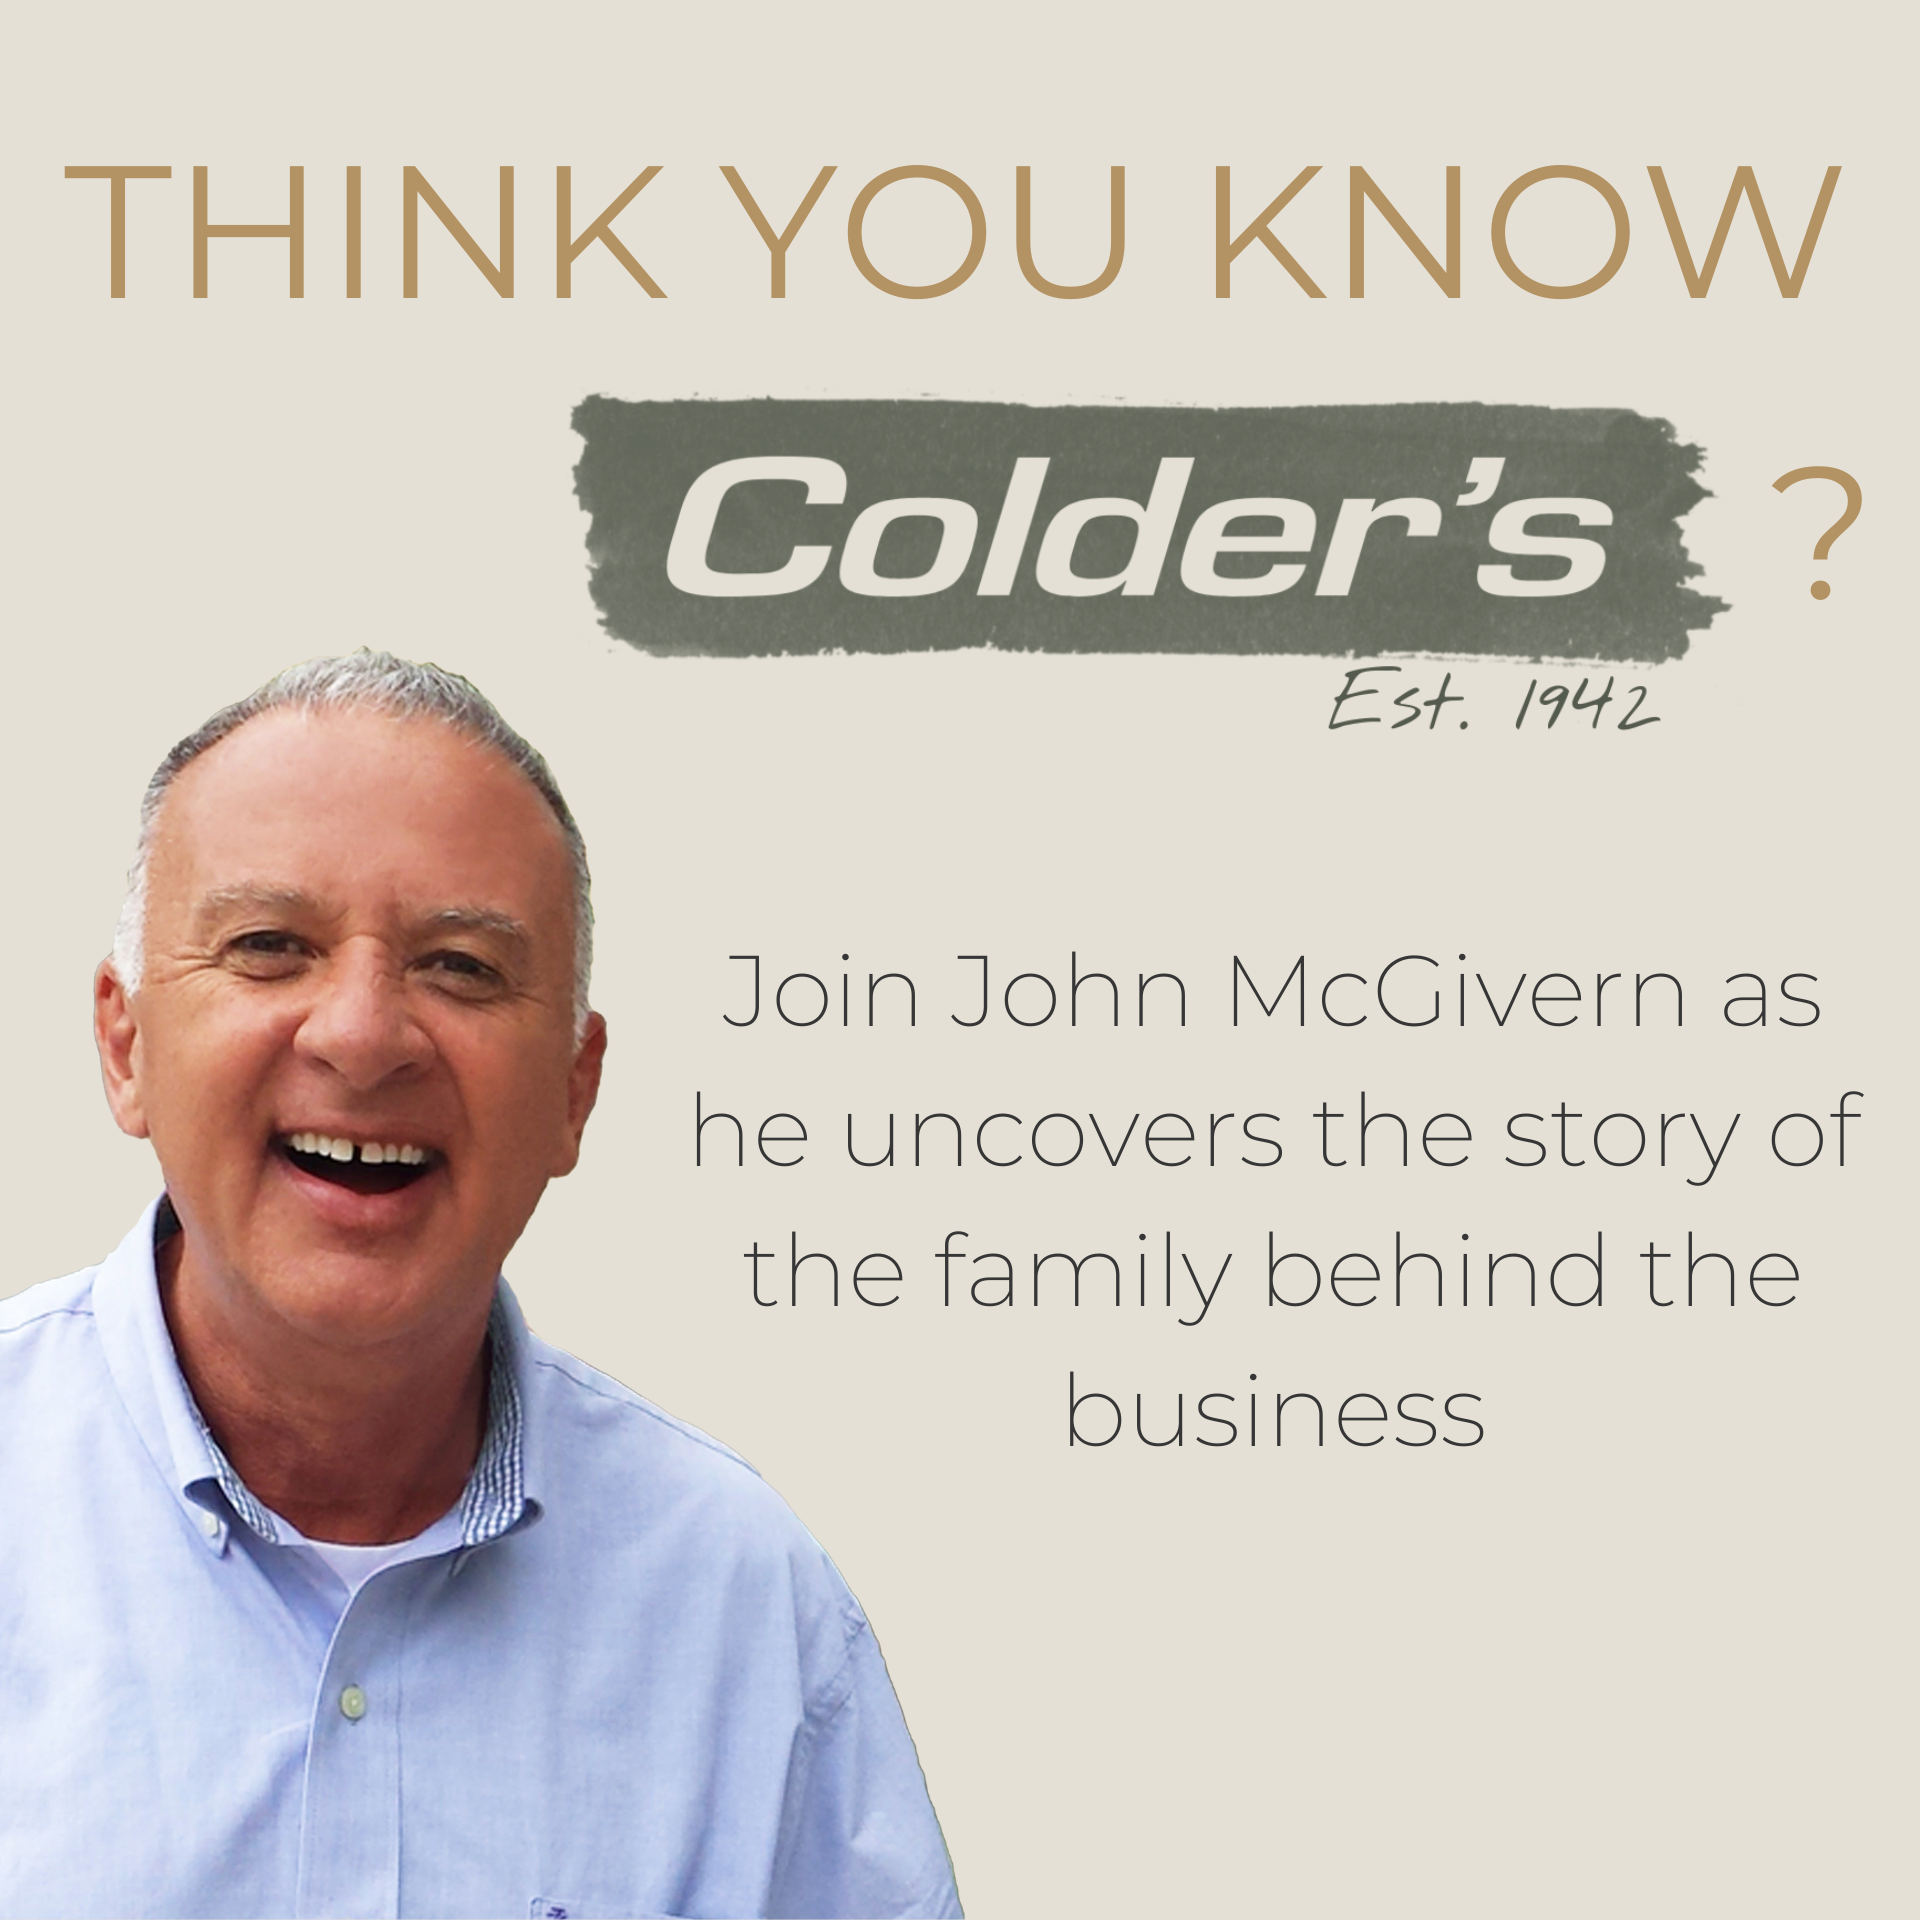 Learn Colder's Story with John McGivern